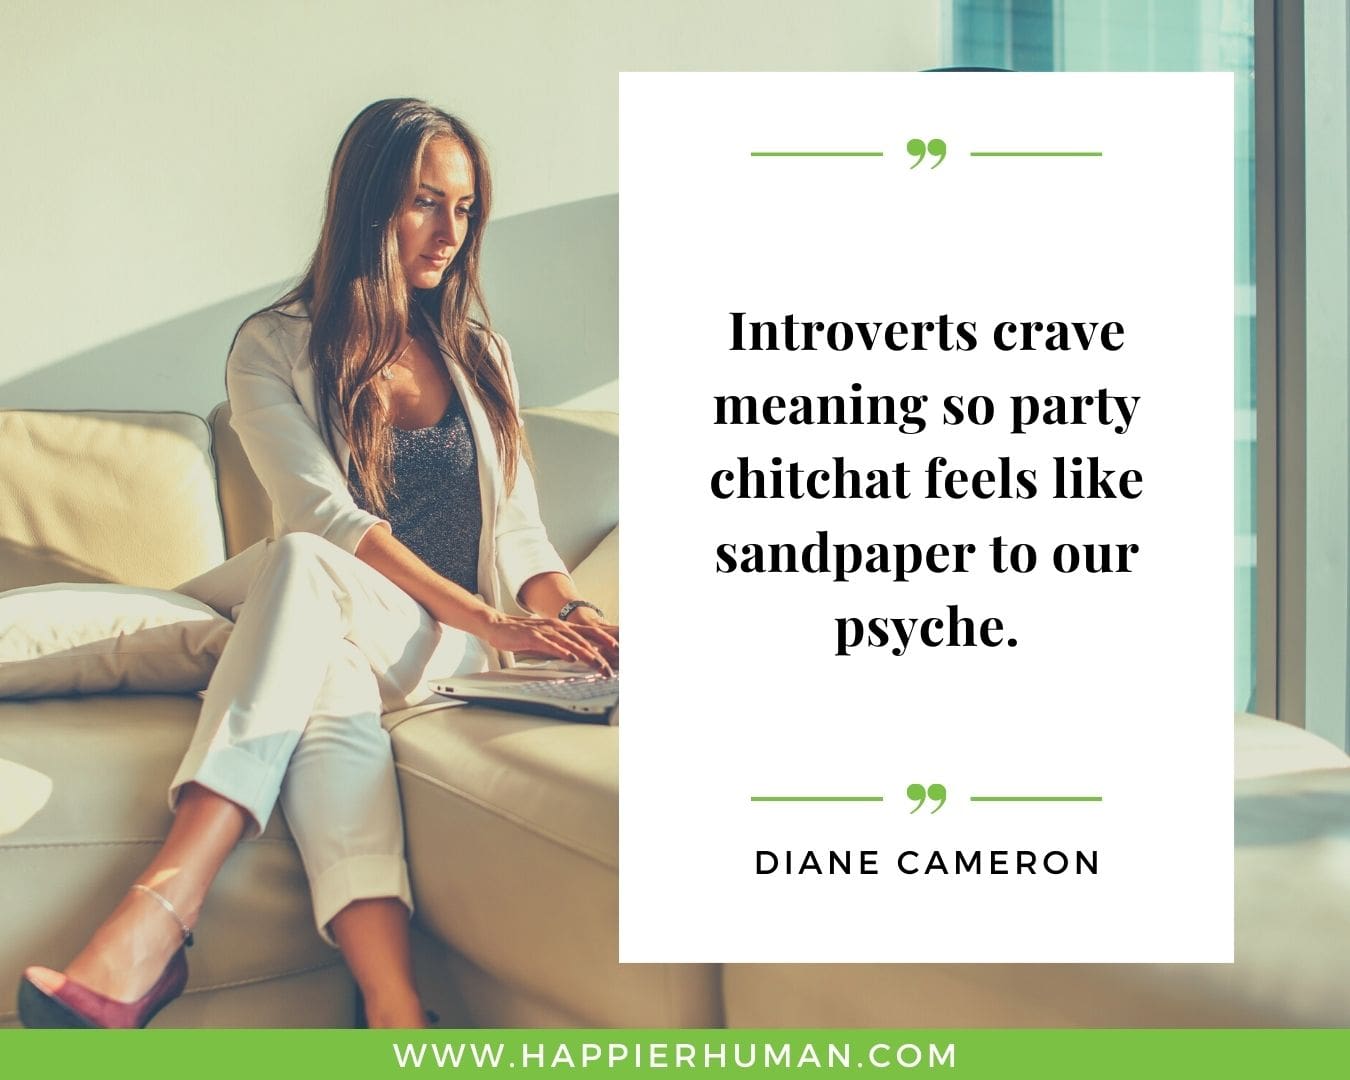 Introvert Quotes - “Introverts crave meaning so party chitchat feels like sandpaper to our psyche.” – Diane Cameron